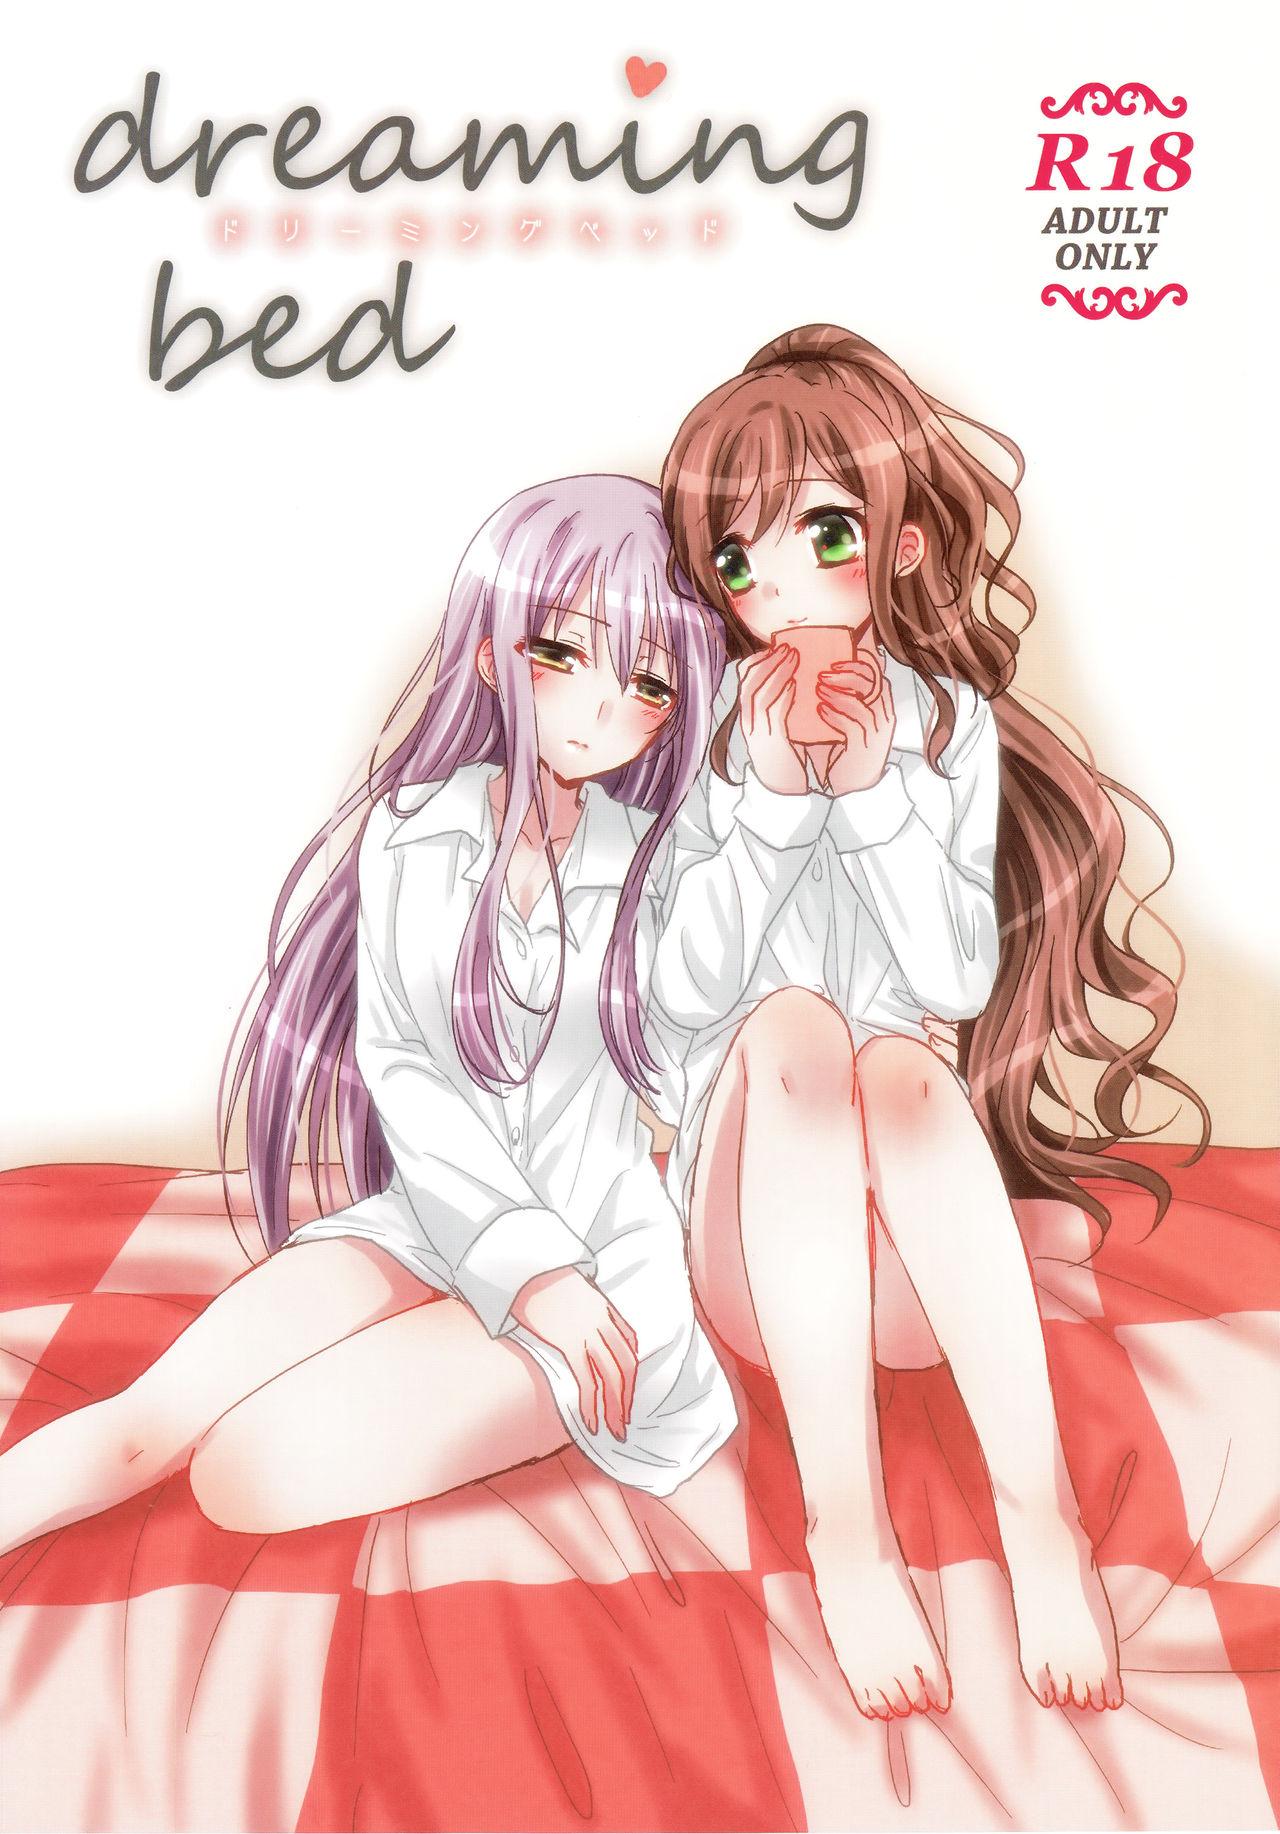 Homo dreaming bed - Bang dream Eat - Picture 1